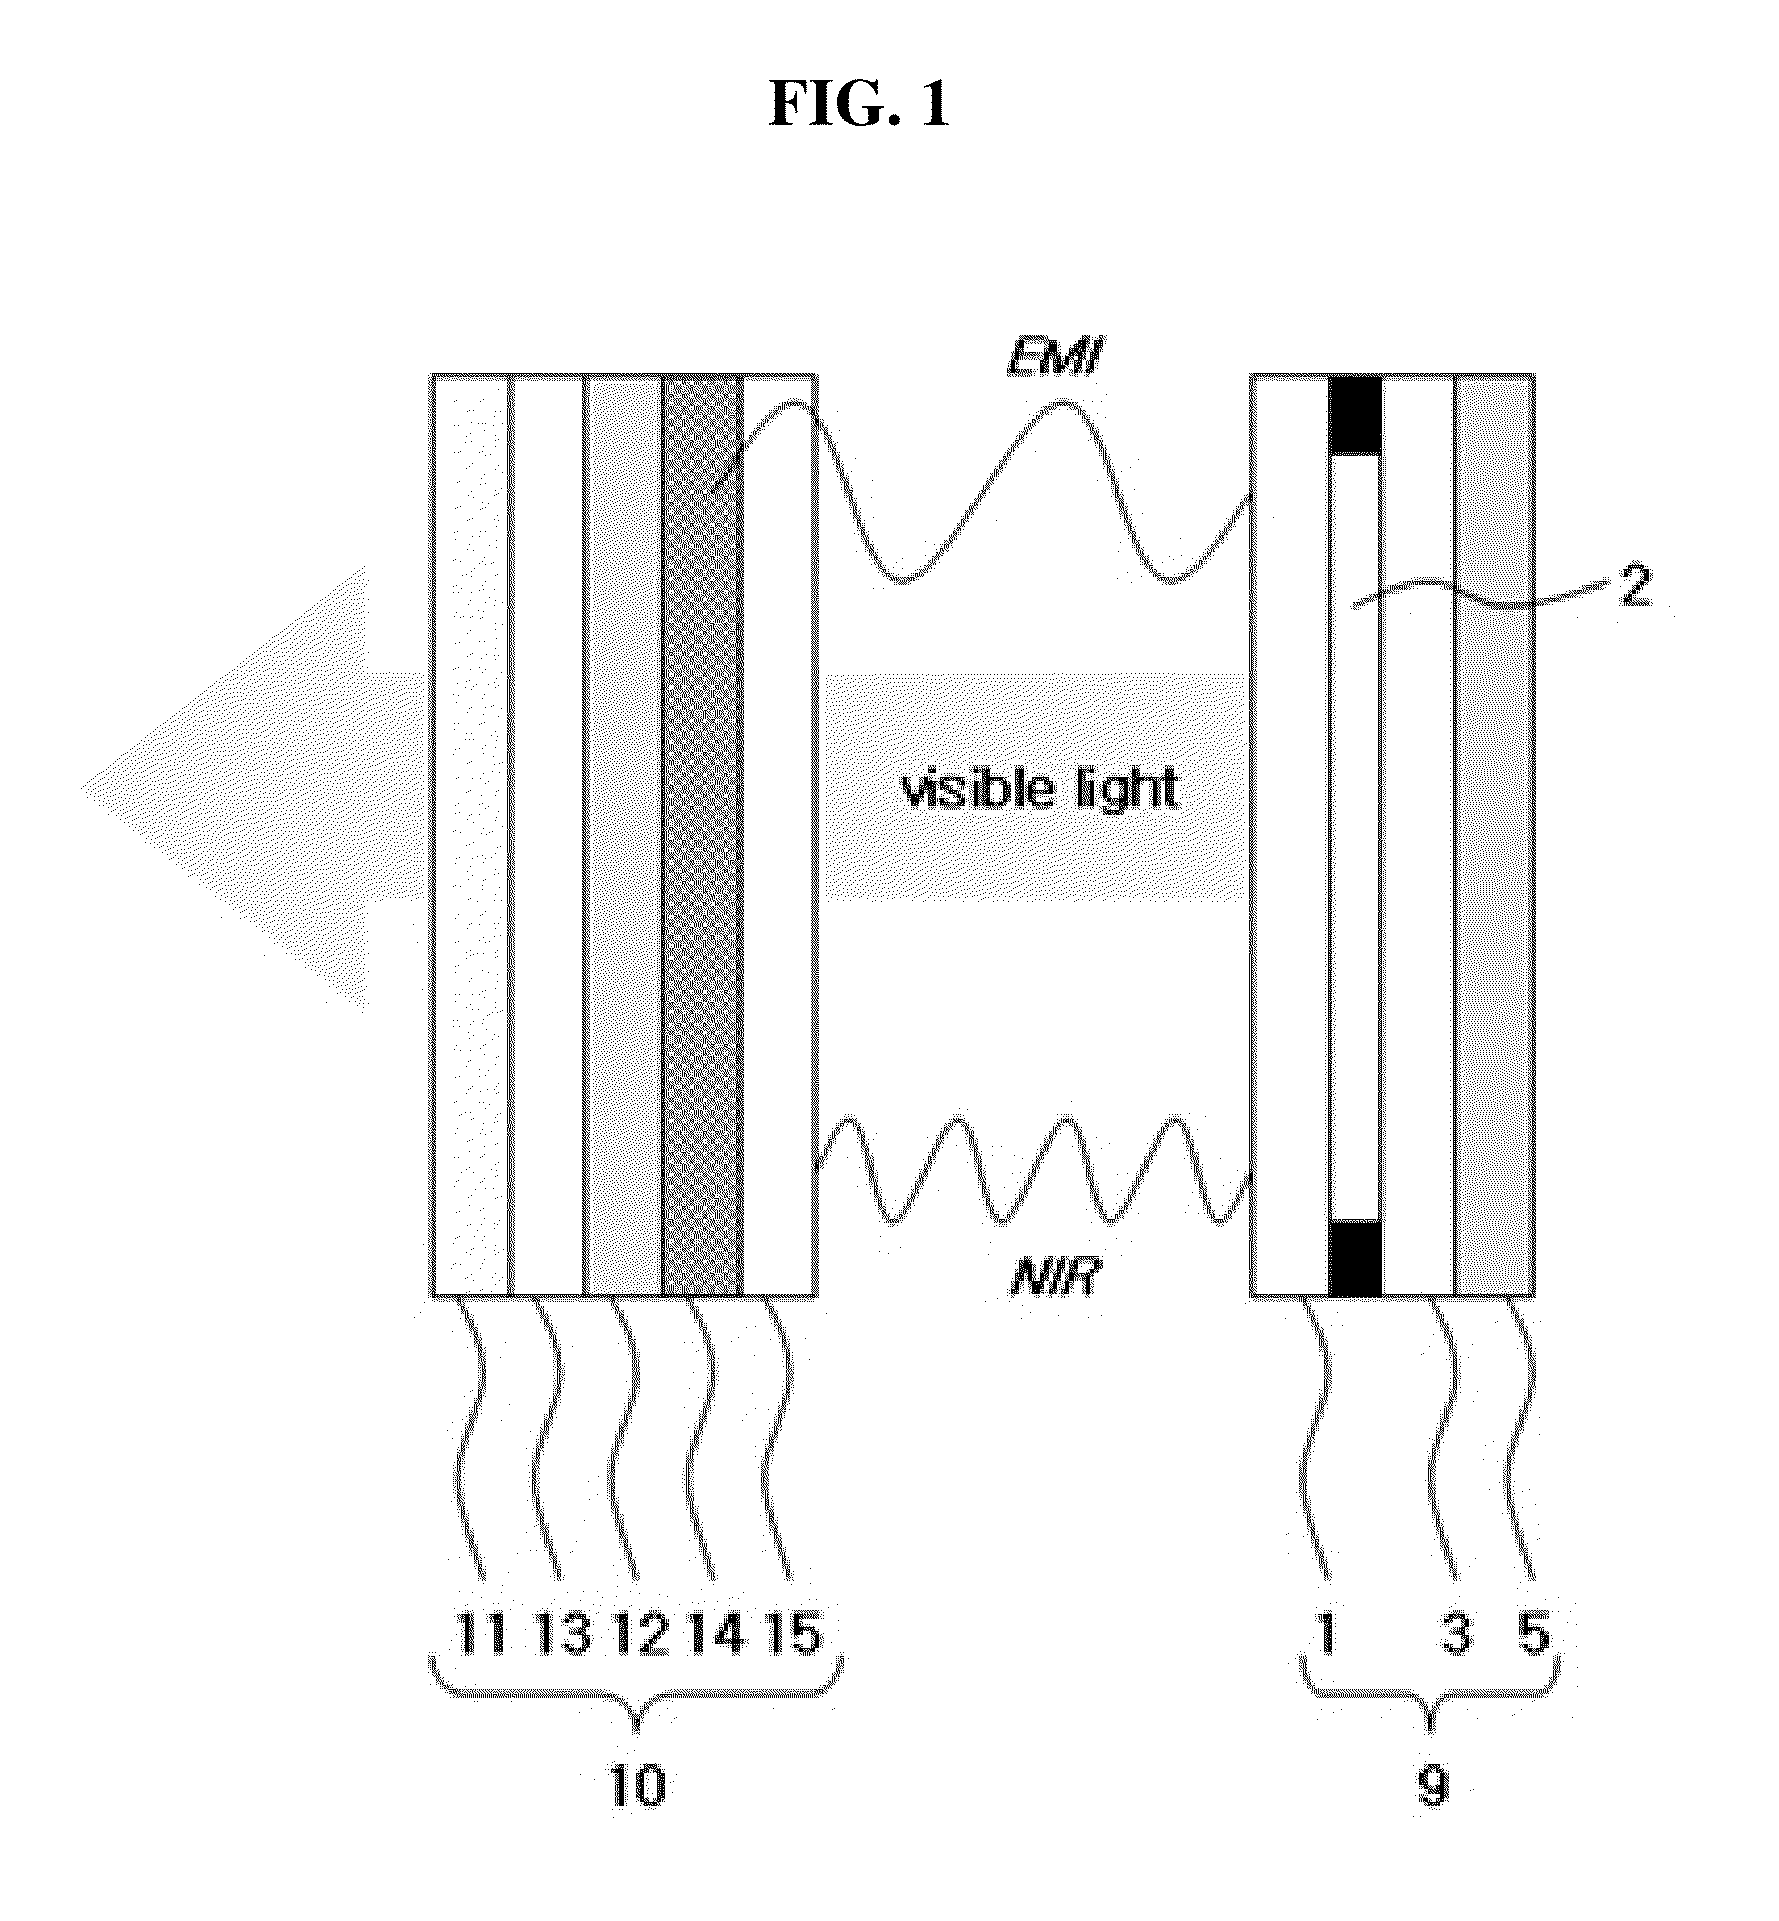 Display filter and display device removing indoor air pollutants